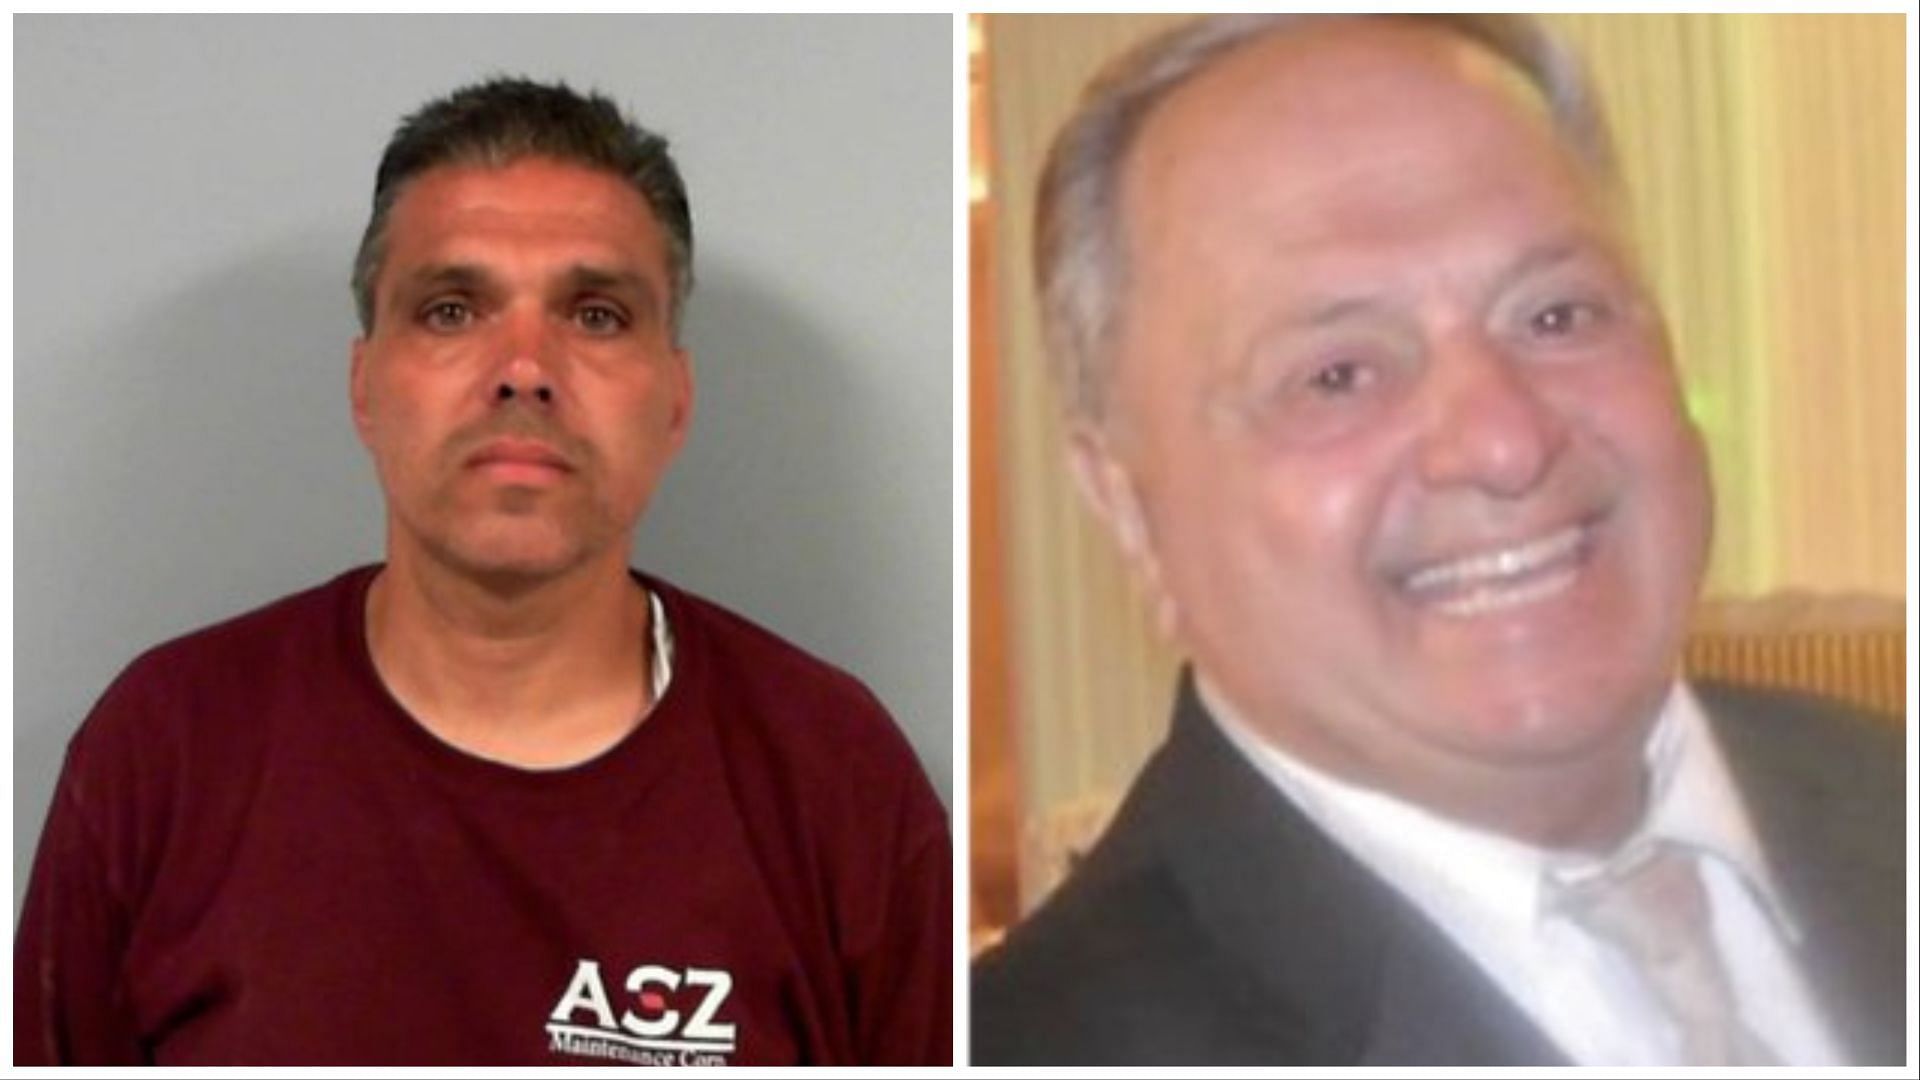 Anthony Zottola (left) has been convicted of killing his father Sylvester Zottola (right), (Images via @JeffNadu/Twitter)